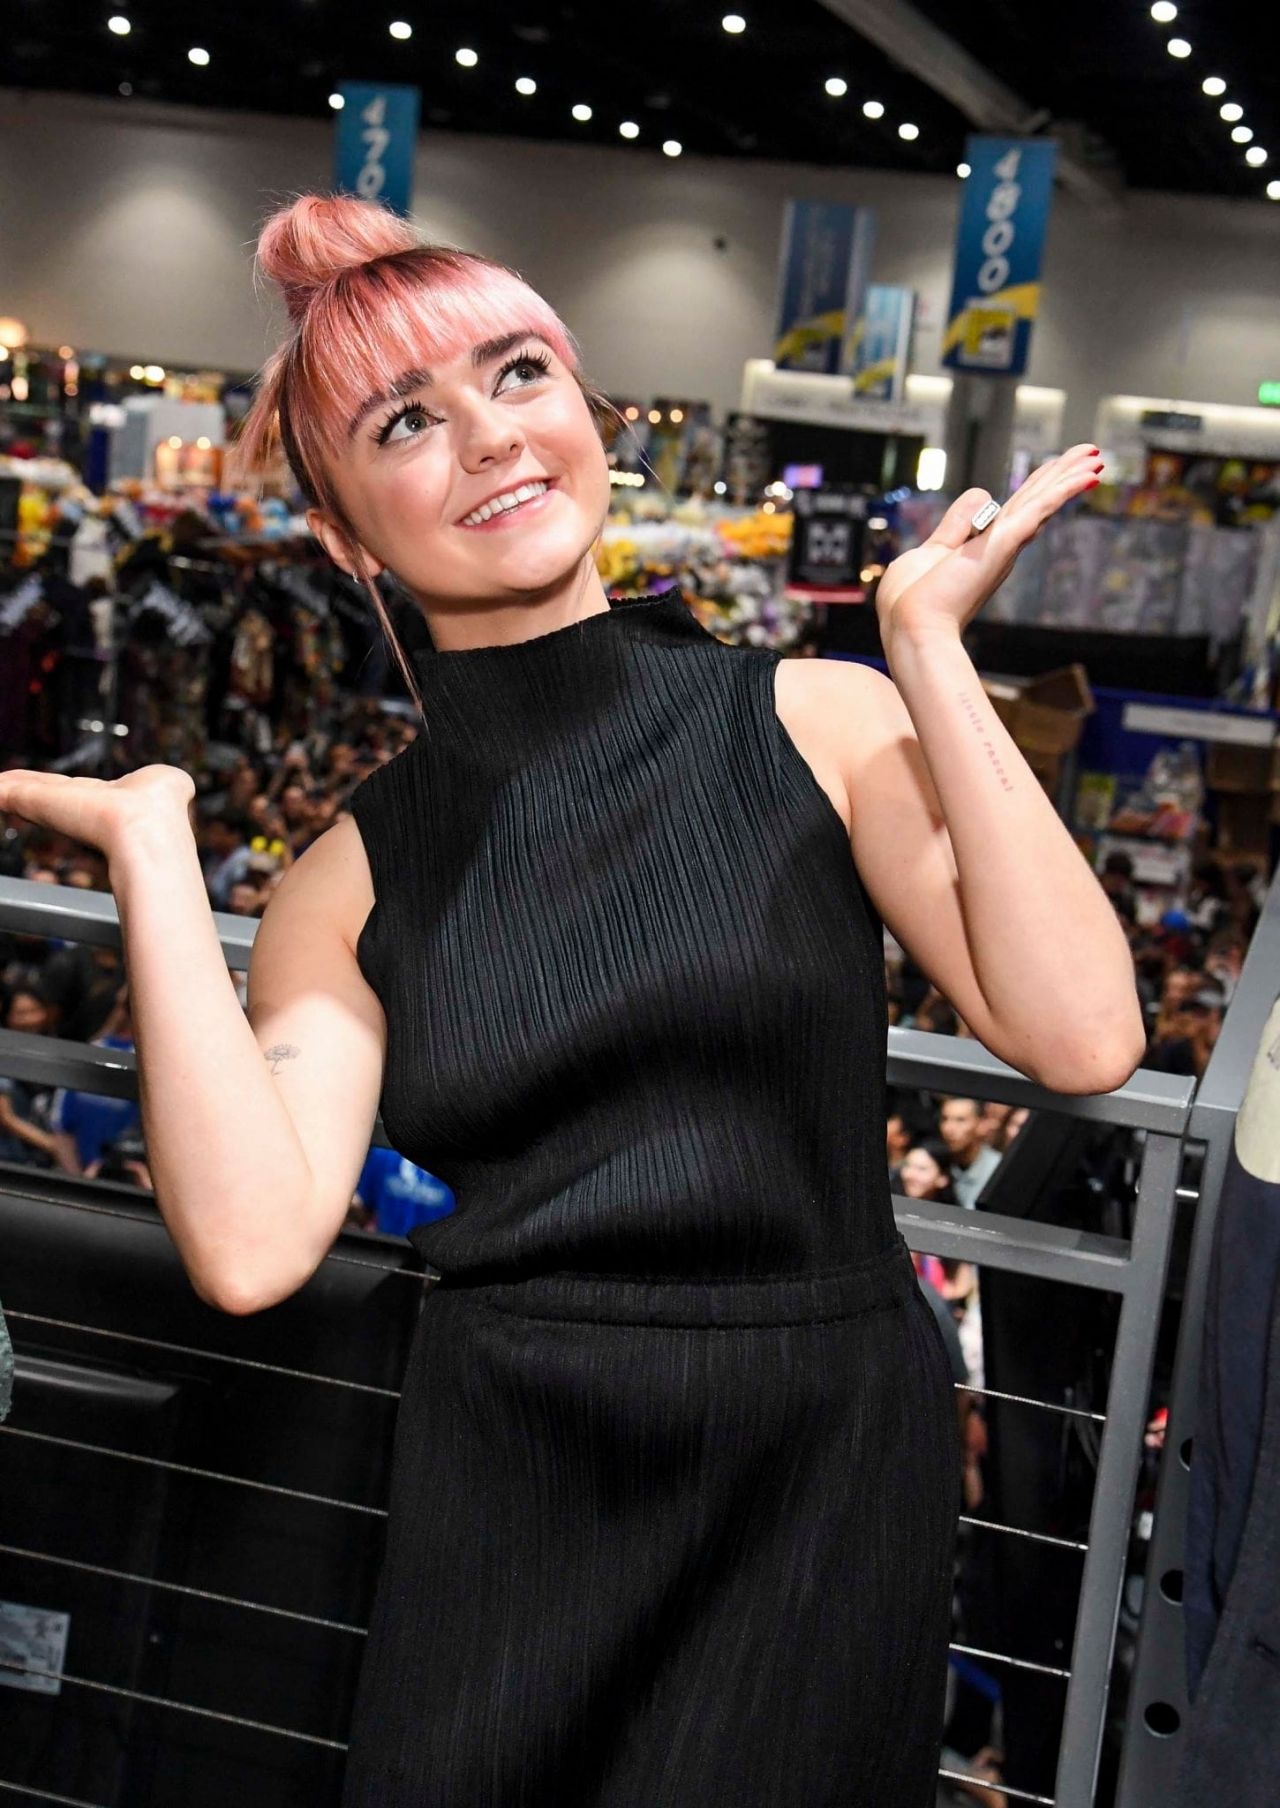 maisie-williams-game-of-thrones-cast-autograph-signing-at-sdcc-2019-8.jpg